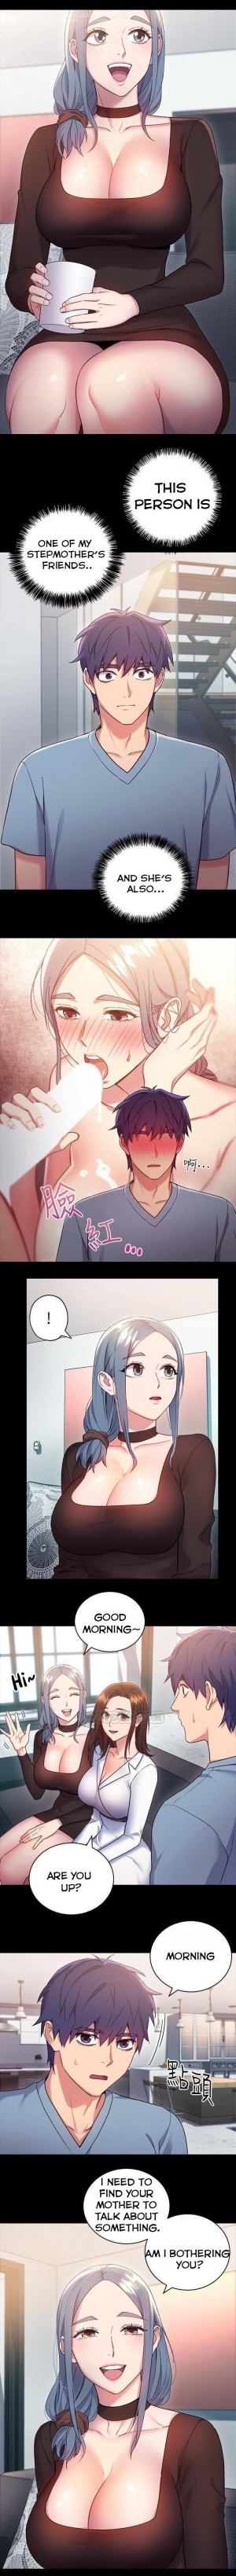  [Neck Pilllow] Stepmother Friends Ch.39/? [English] [Hentai Universe] NEW! 13/10/2020  - Page 108